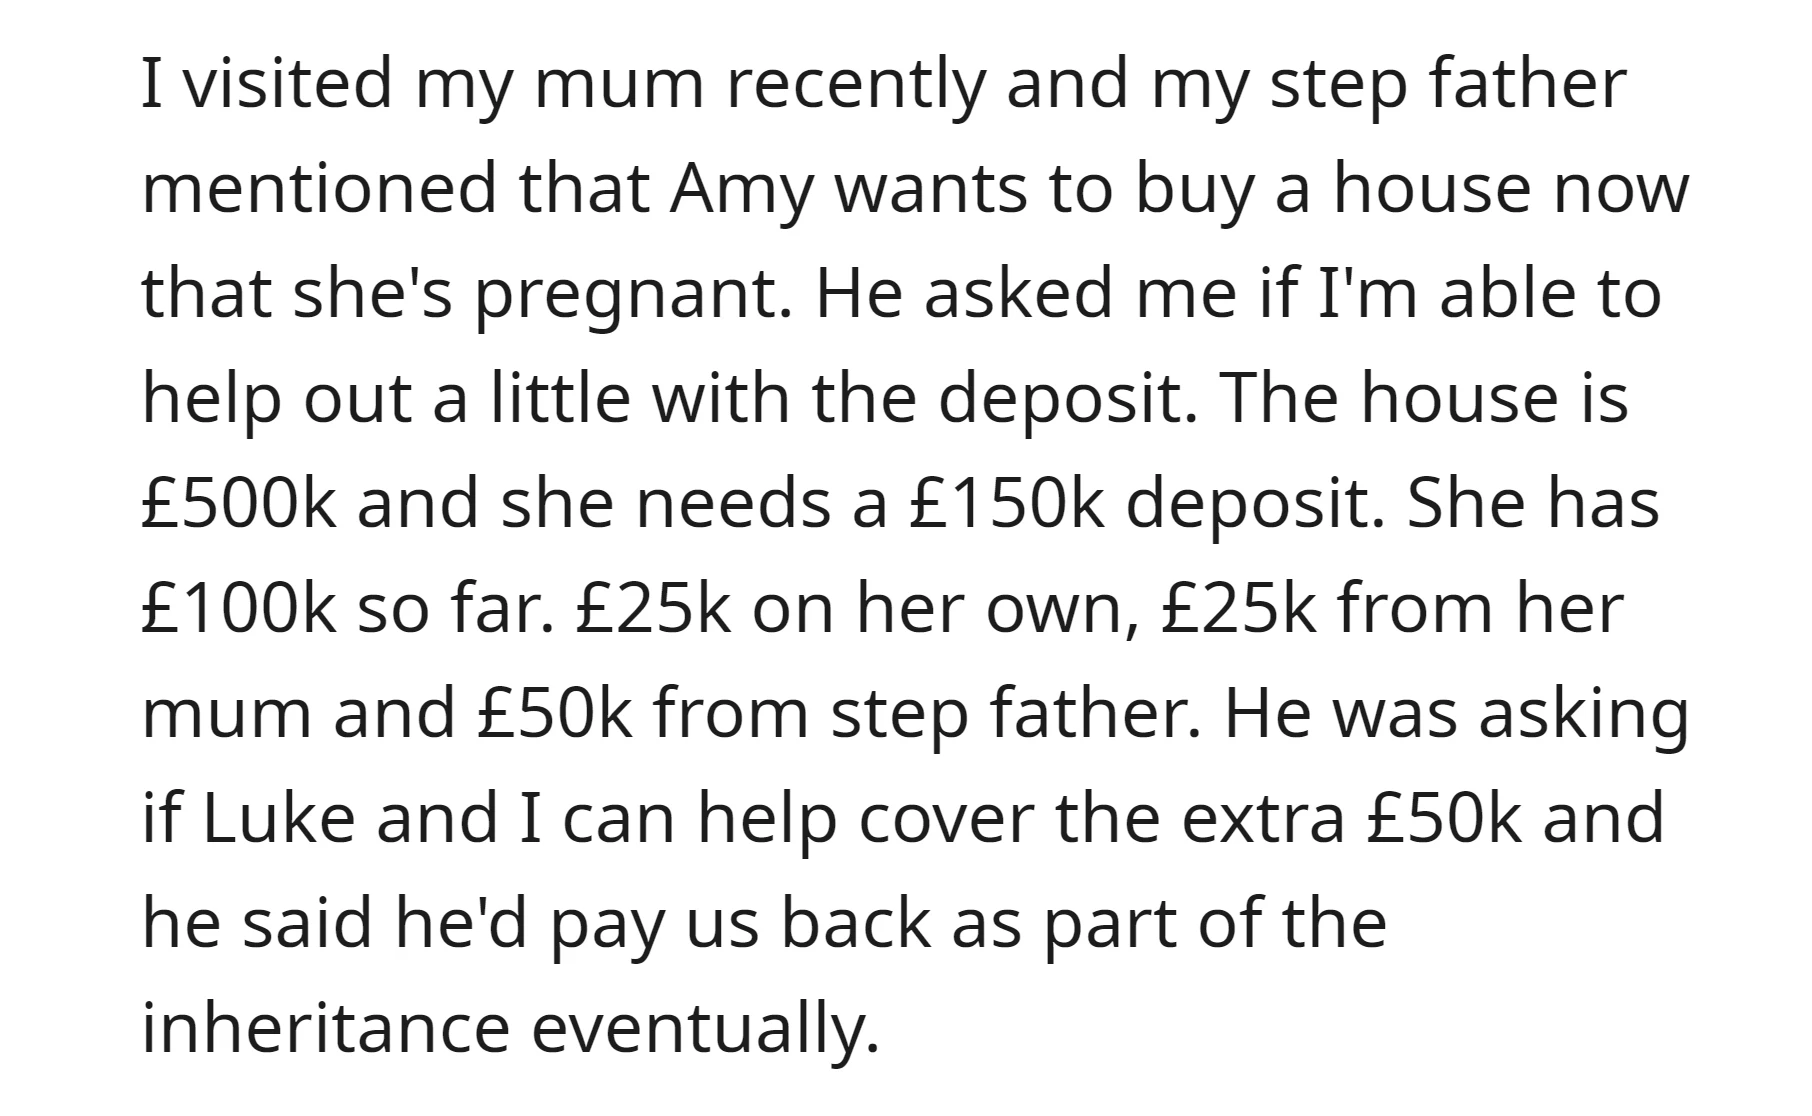 OP's stepfather asked if she and her brother could contribute £50k to help his pregnant daughter